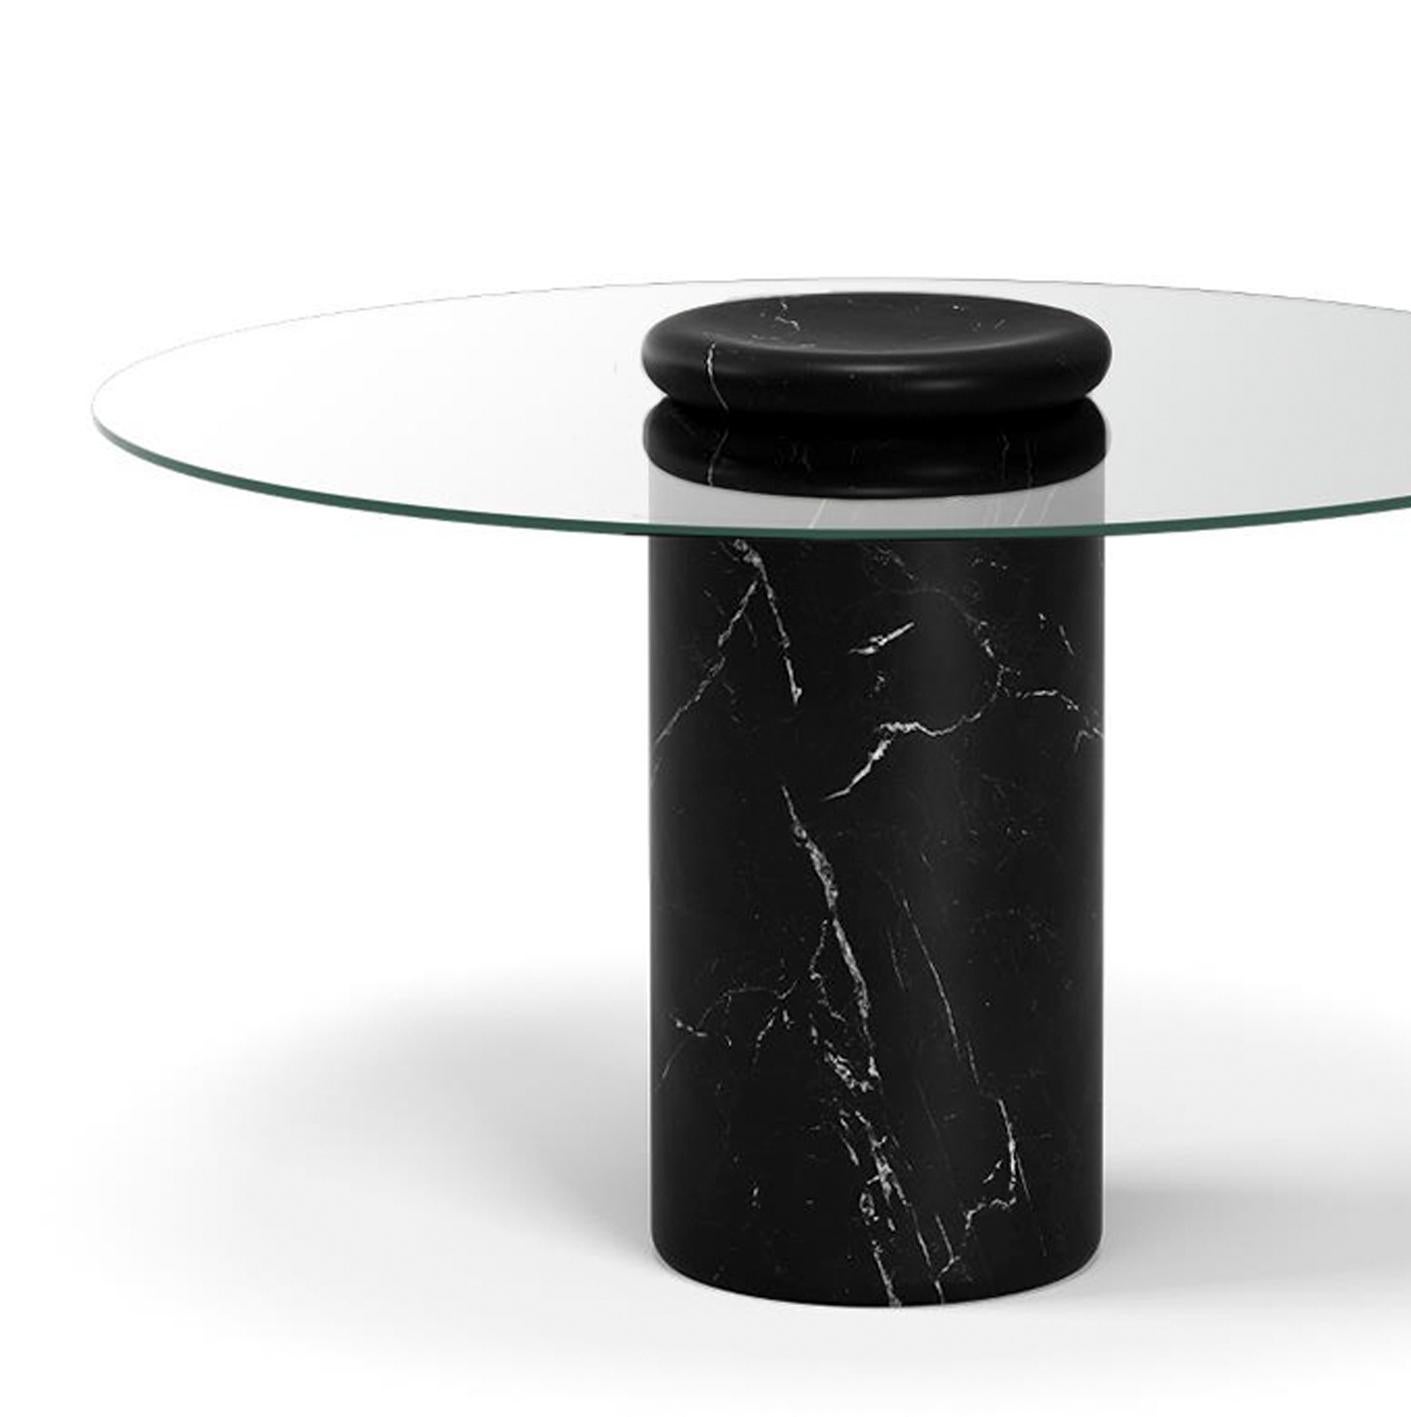 Table designed by Angelo Mangiarotti.

Castore is a glass and marble table by Italian architect, sculptor and designer Angelo Mangiarotti. Designed in 1975 for Sorgente dei Mobili, the distinct design is now presented by Karakter, available as a